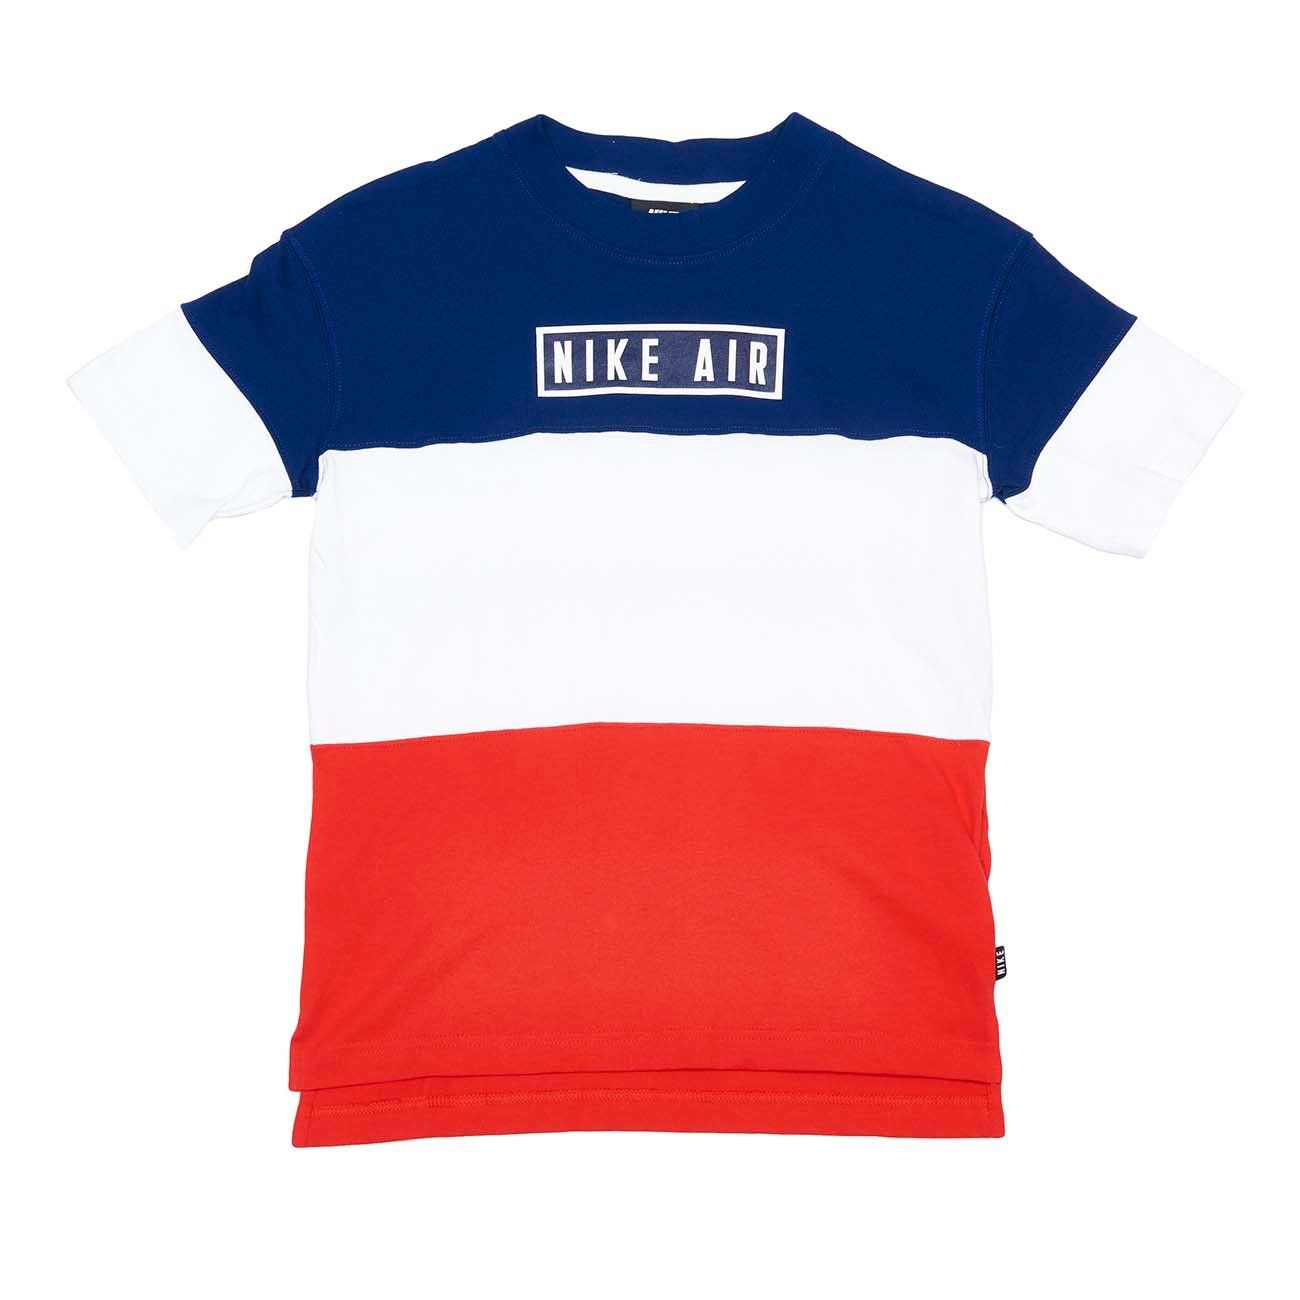 NIKE TRICOLOR T-SHIRT WITH PRINTED LOGO Blue White Red Mascheroni Sportswear